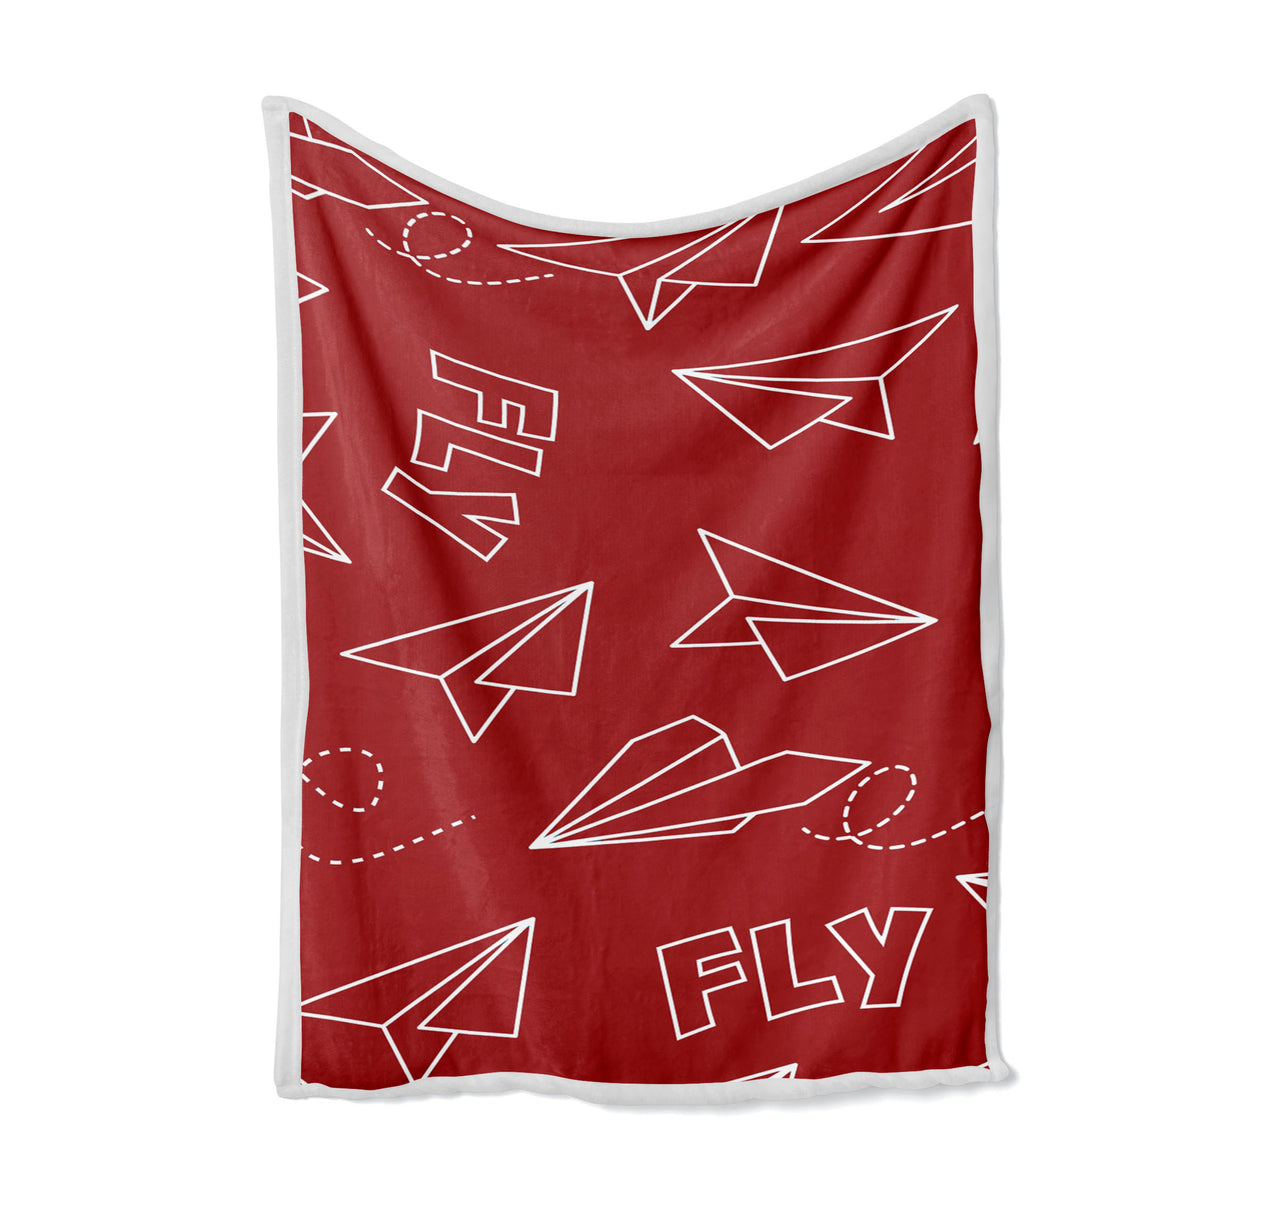 Paper Airplane & Fly-Red Designed Bed Blankets & Covers